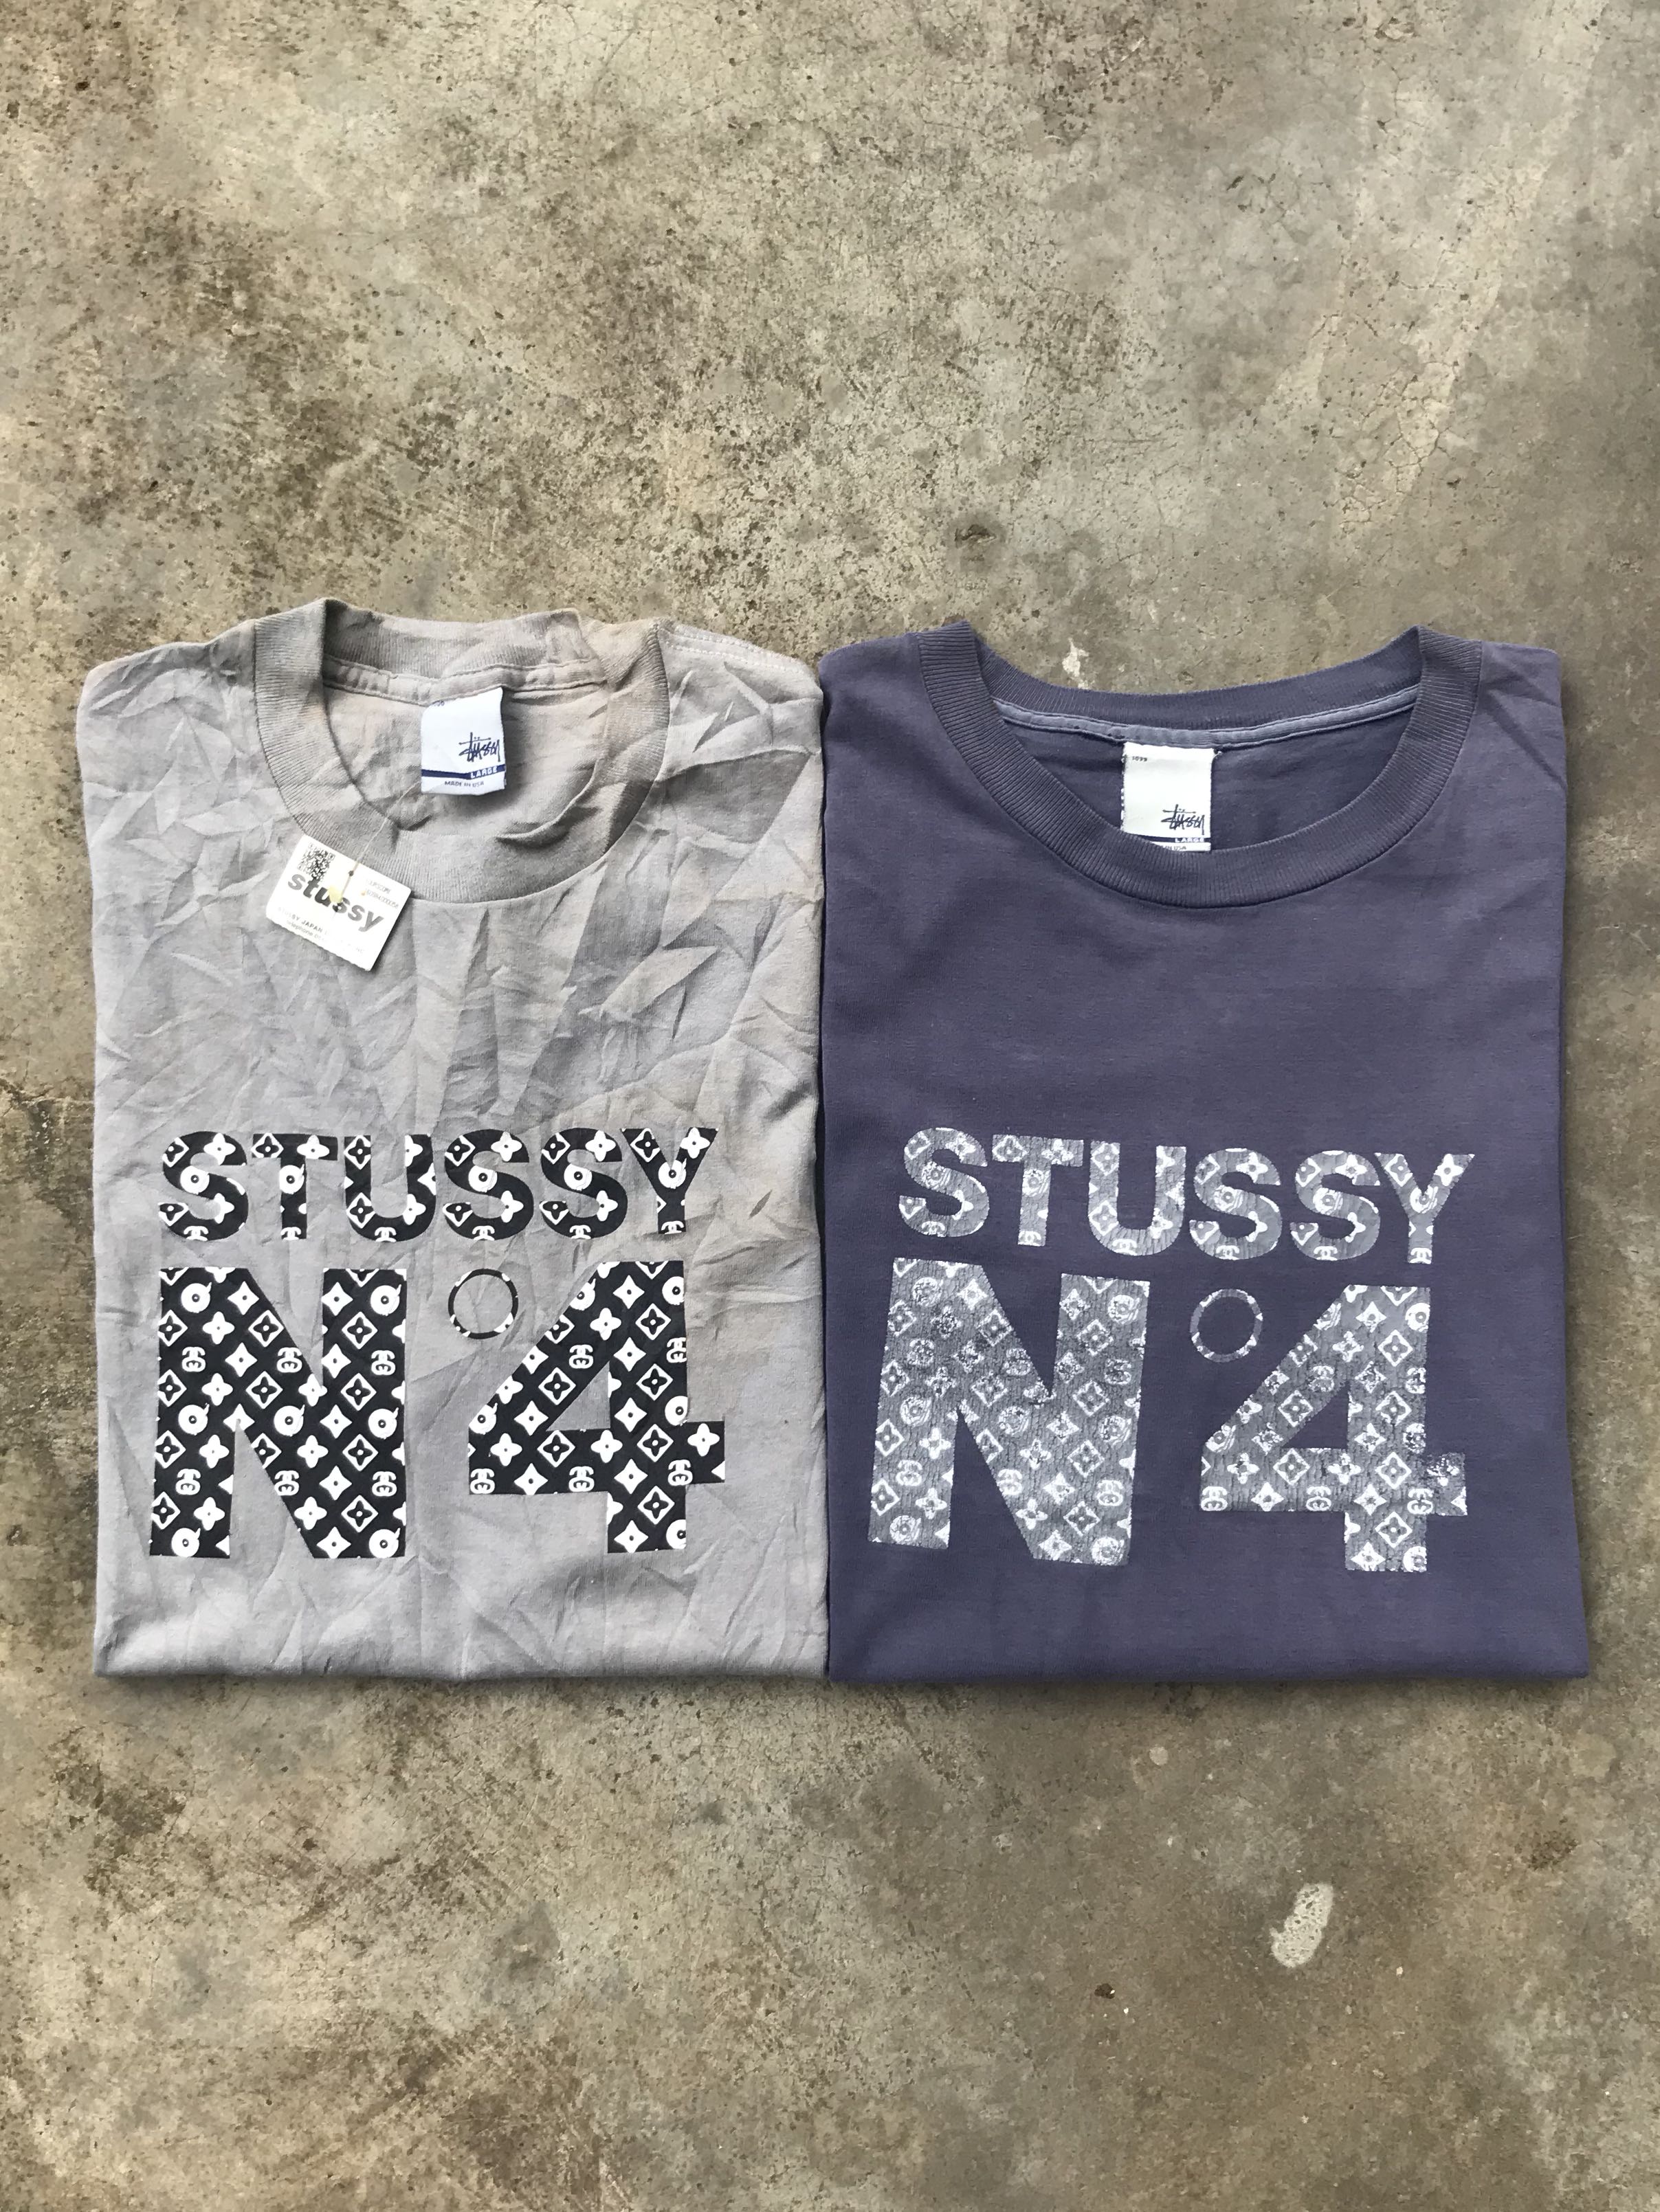 We Vintage - STUSSY X LOUIS VUITTON The matching Stussy LV shirt & shorts  are on website. Get yourself the full set at www.wevintage.uk 👊🏻